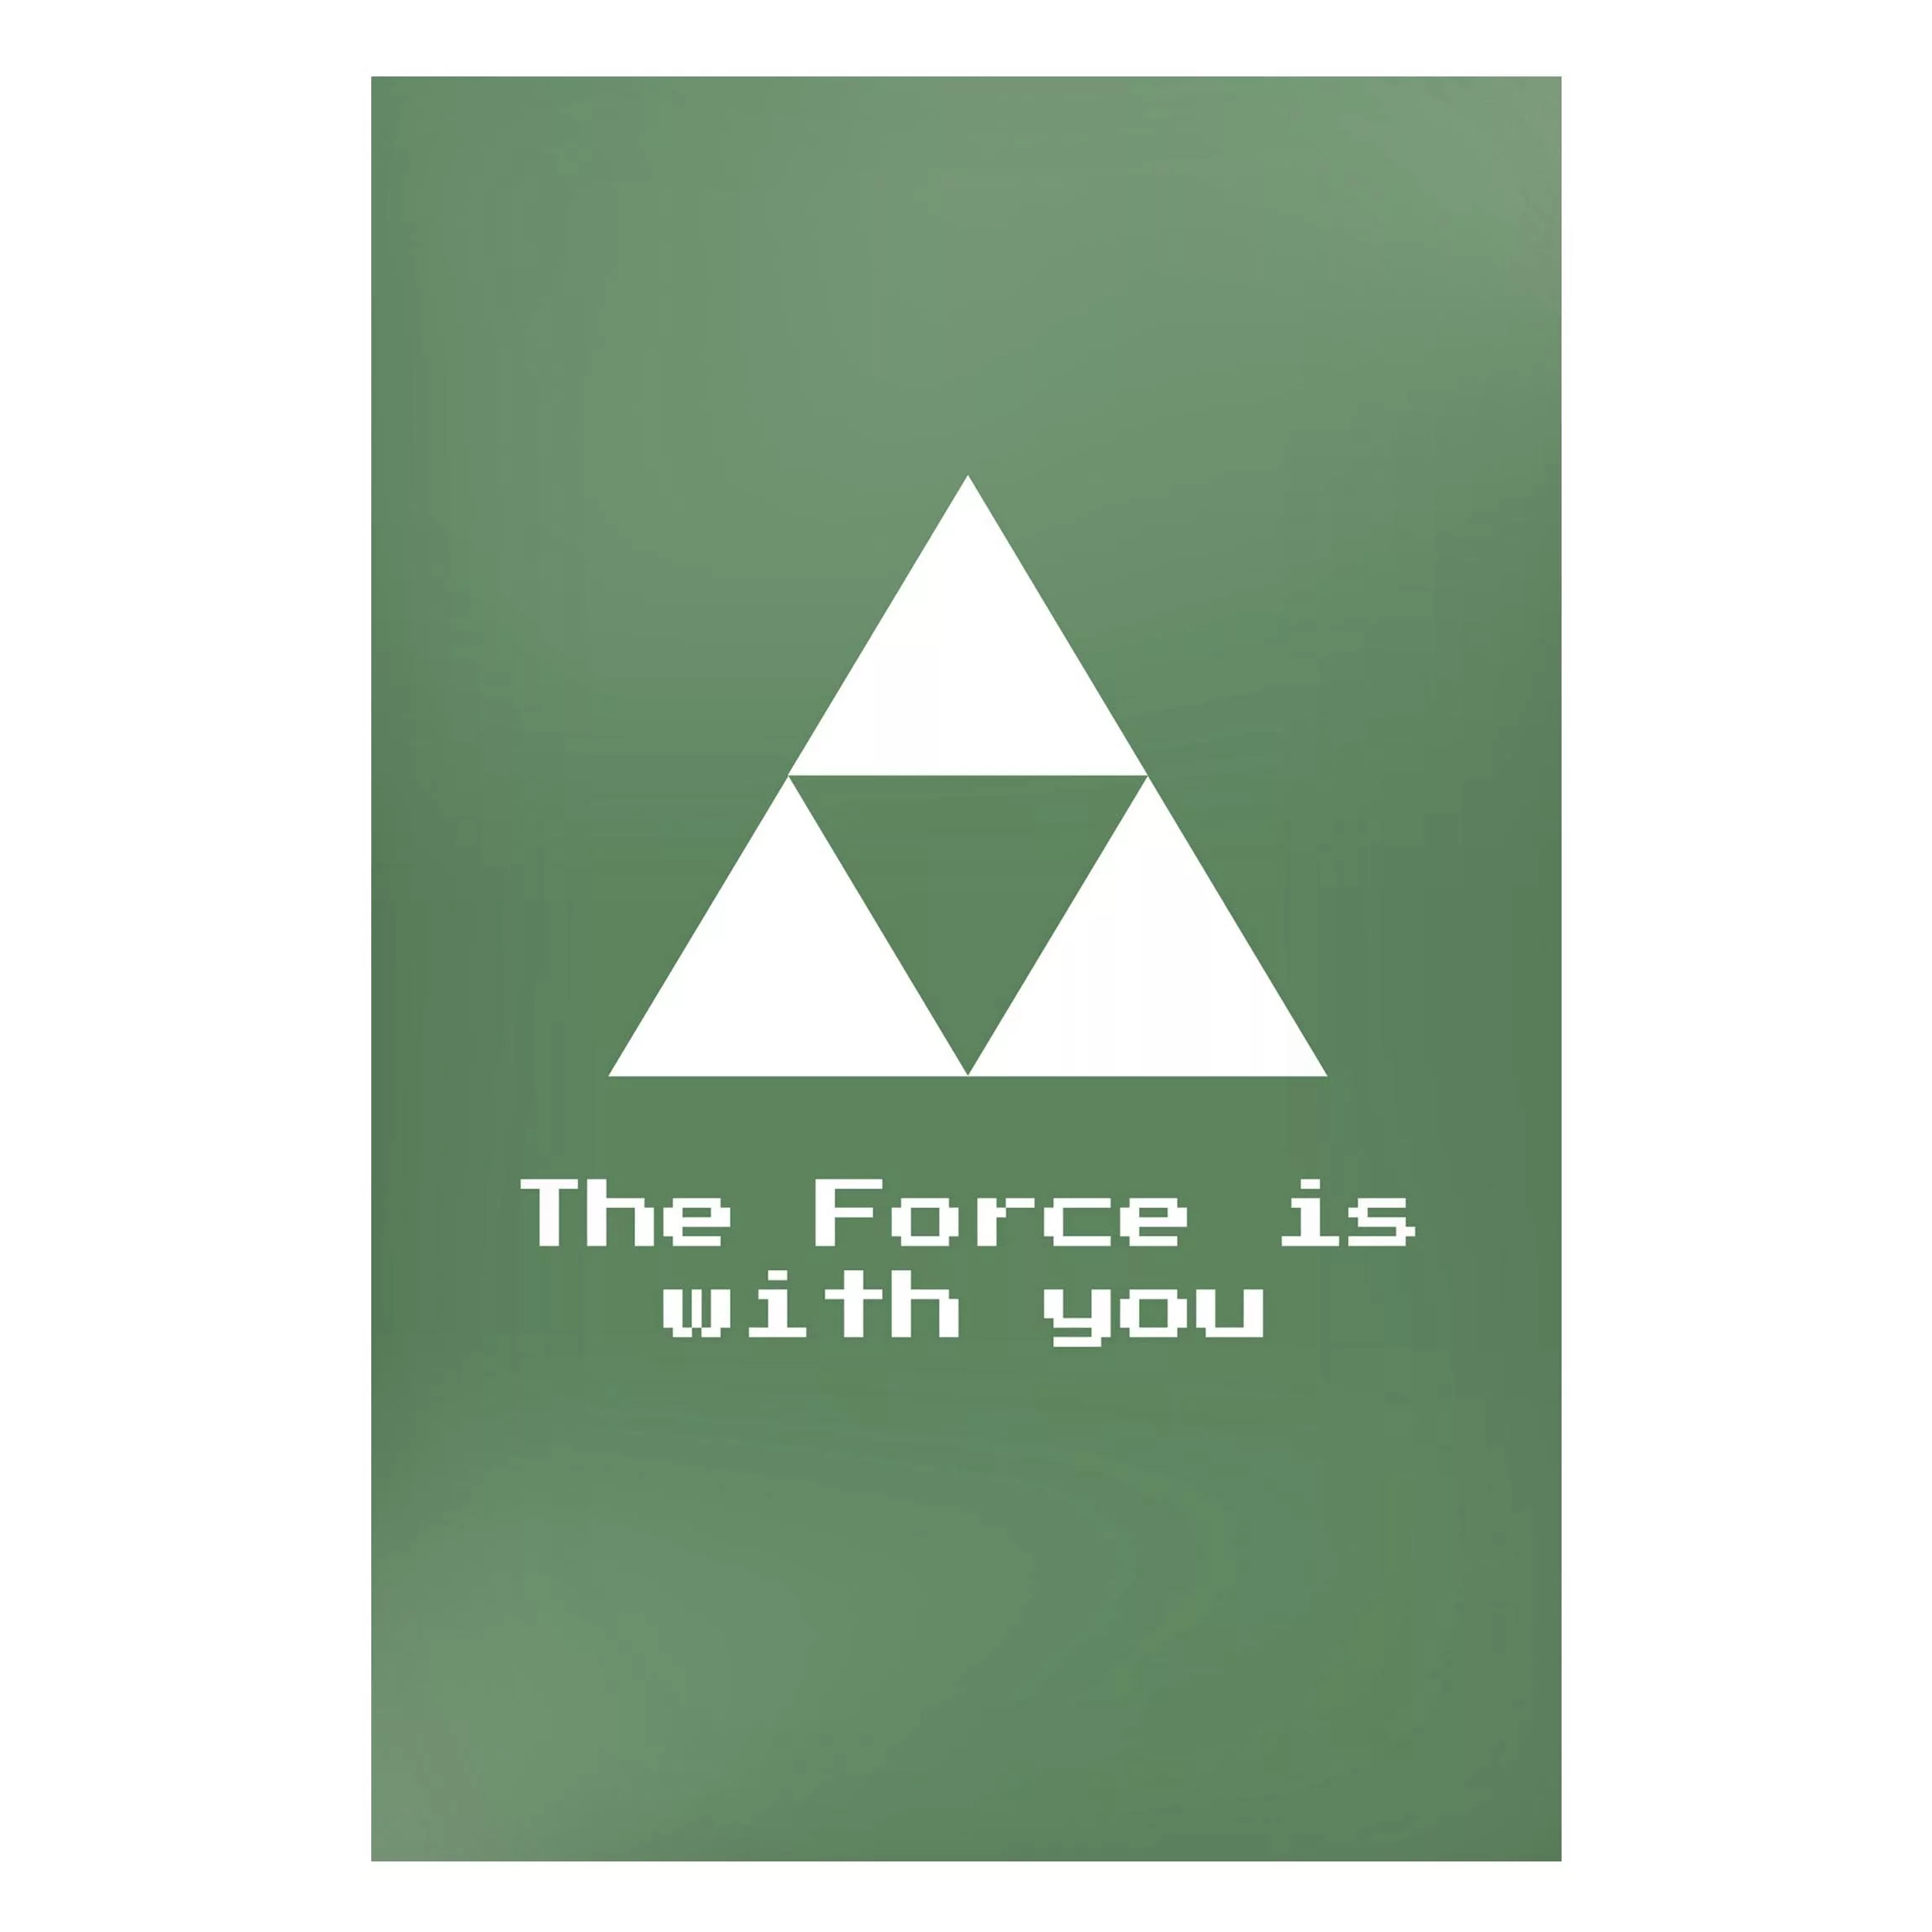 Magnettafel Gaming Symbol The Force is with You günstig online kaufen